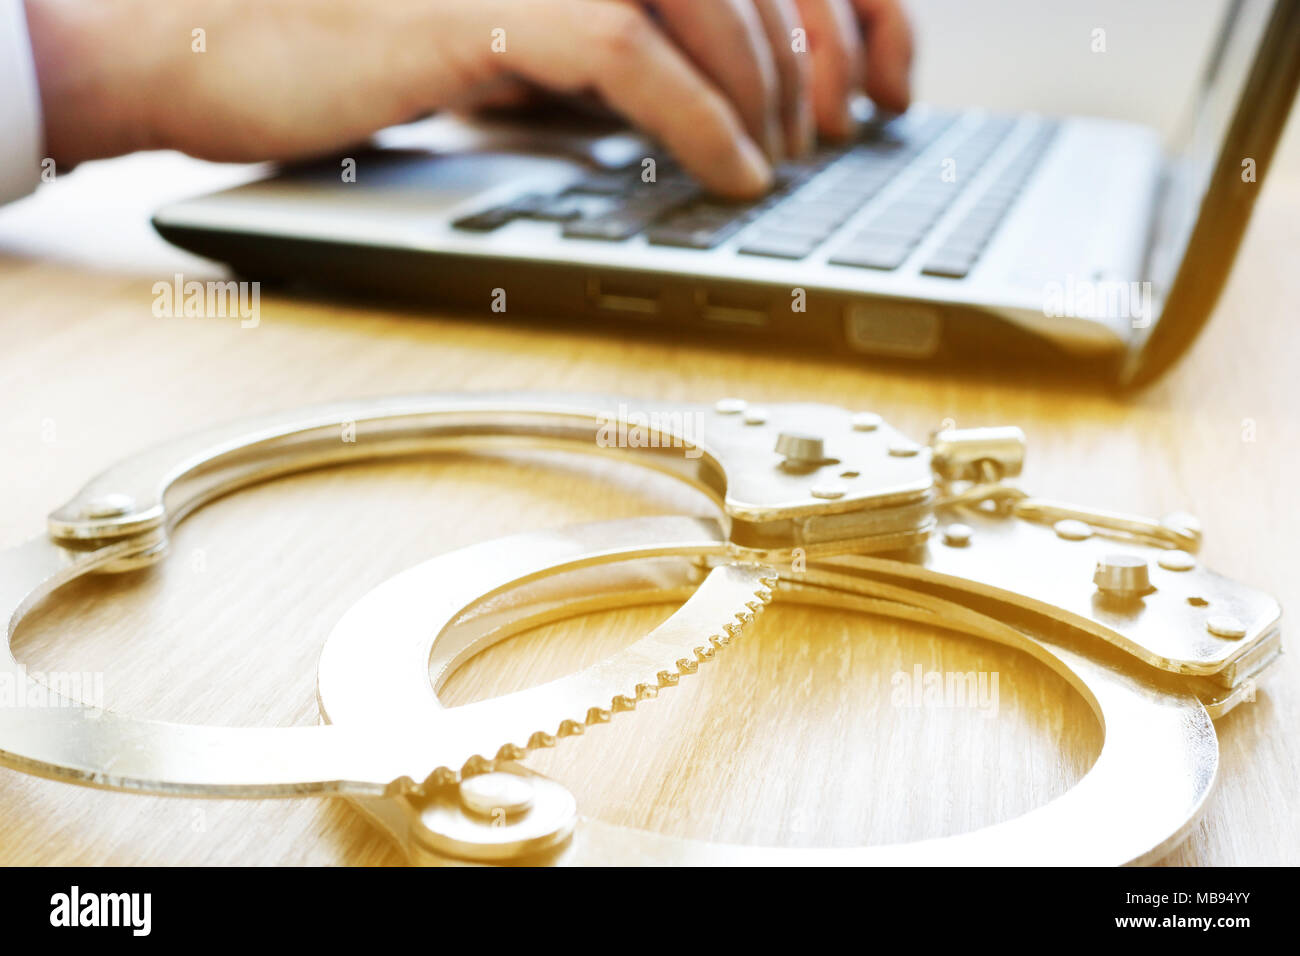 Computer crime. Man with laptop and handcuffs. Investigation concept. Stock Photo